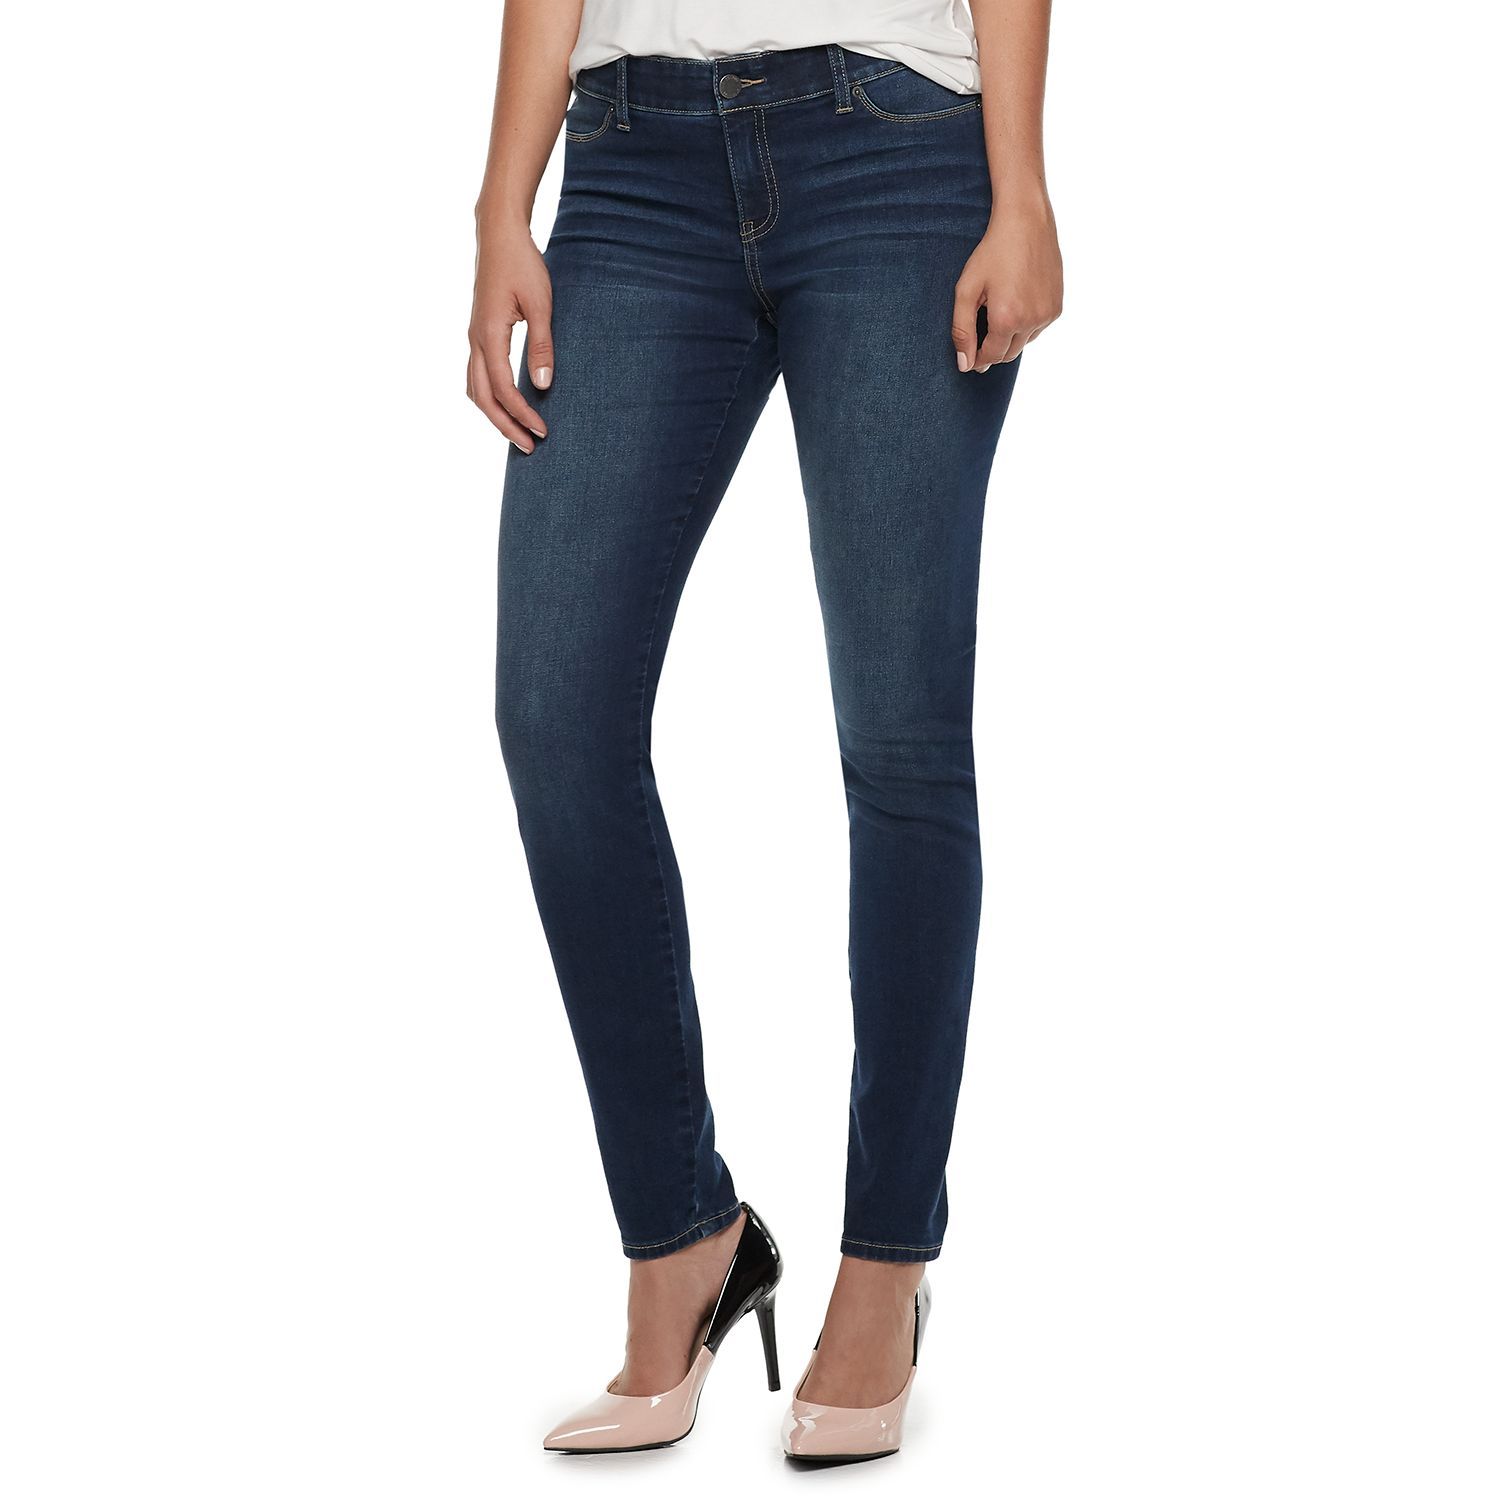 Women's Juicy Couture Flaunt It Seamless Midrise Skinny Jeans | Kohl's